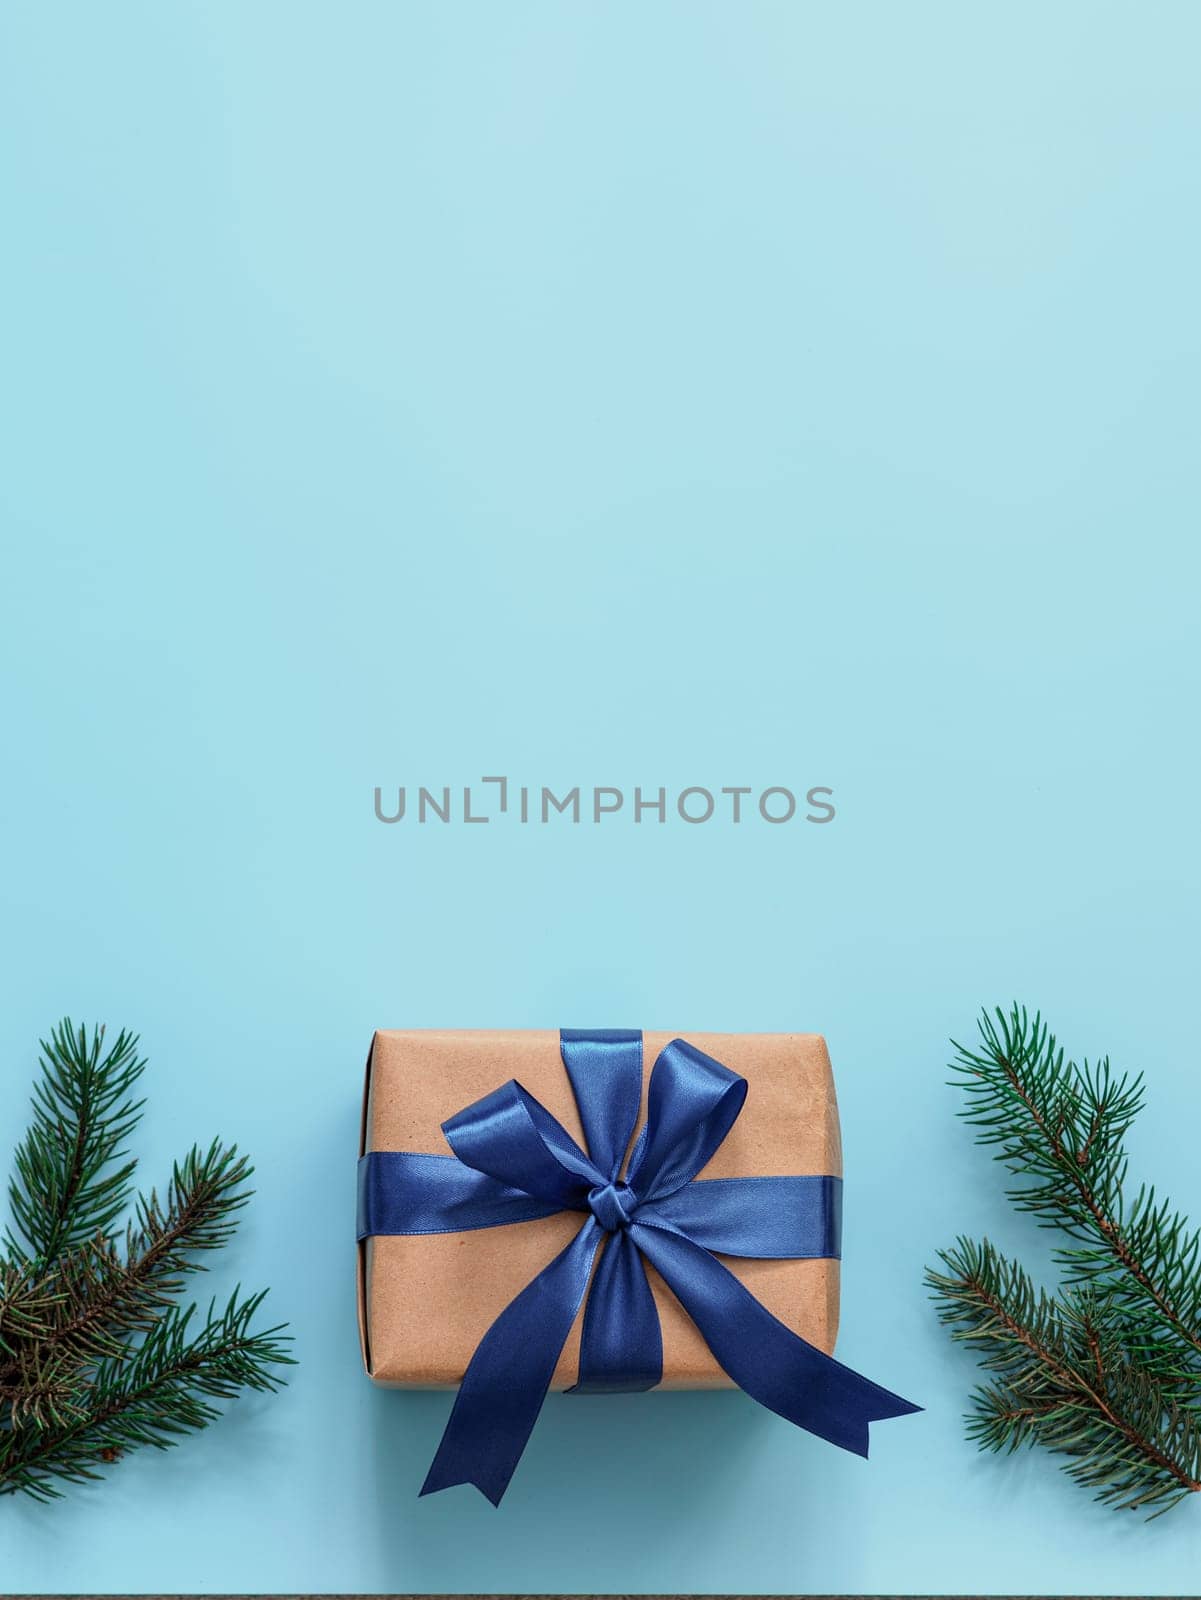 Gift box in craft wrapping paper and blue satin ribbon on turquoise blue background, copy space top. Beautiful Christmas or New Year present and fir branches, flat lay or top view. Vertical